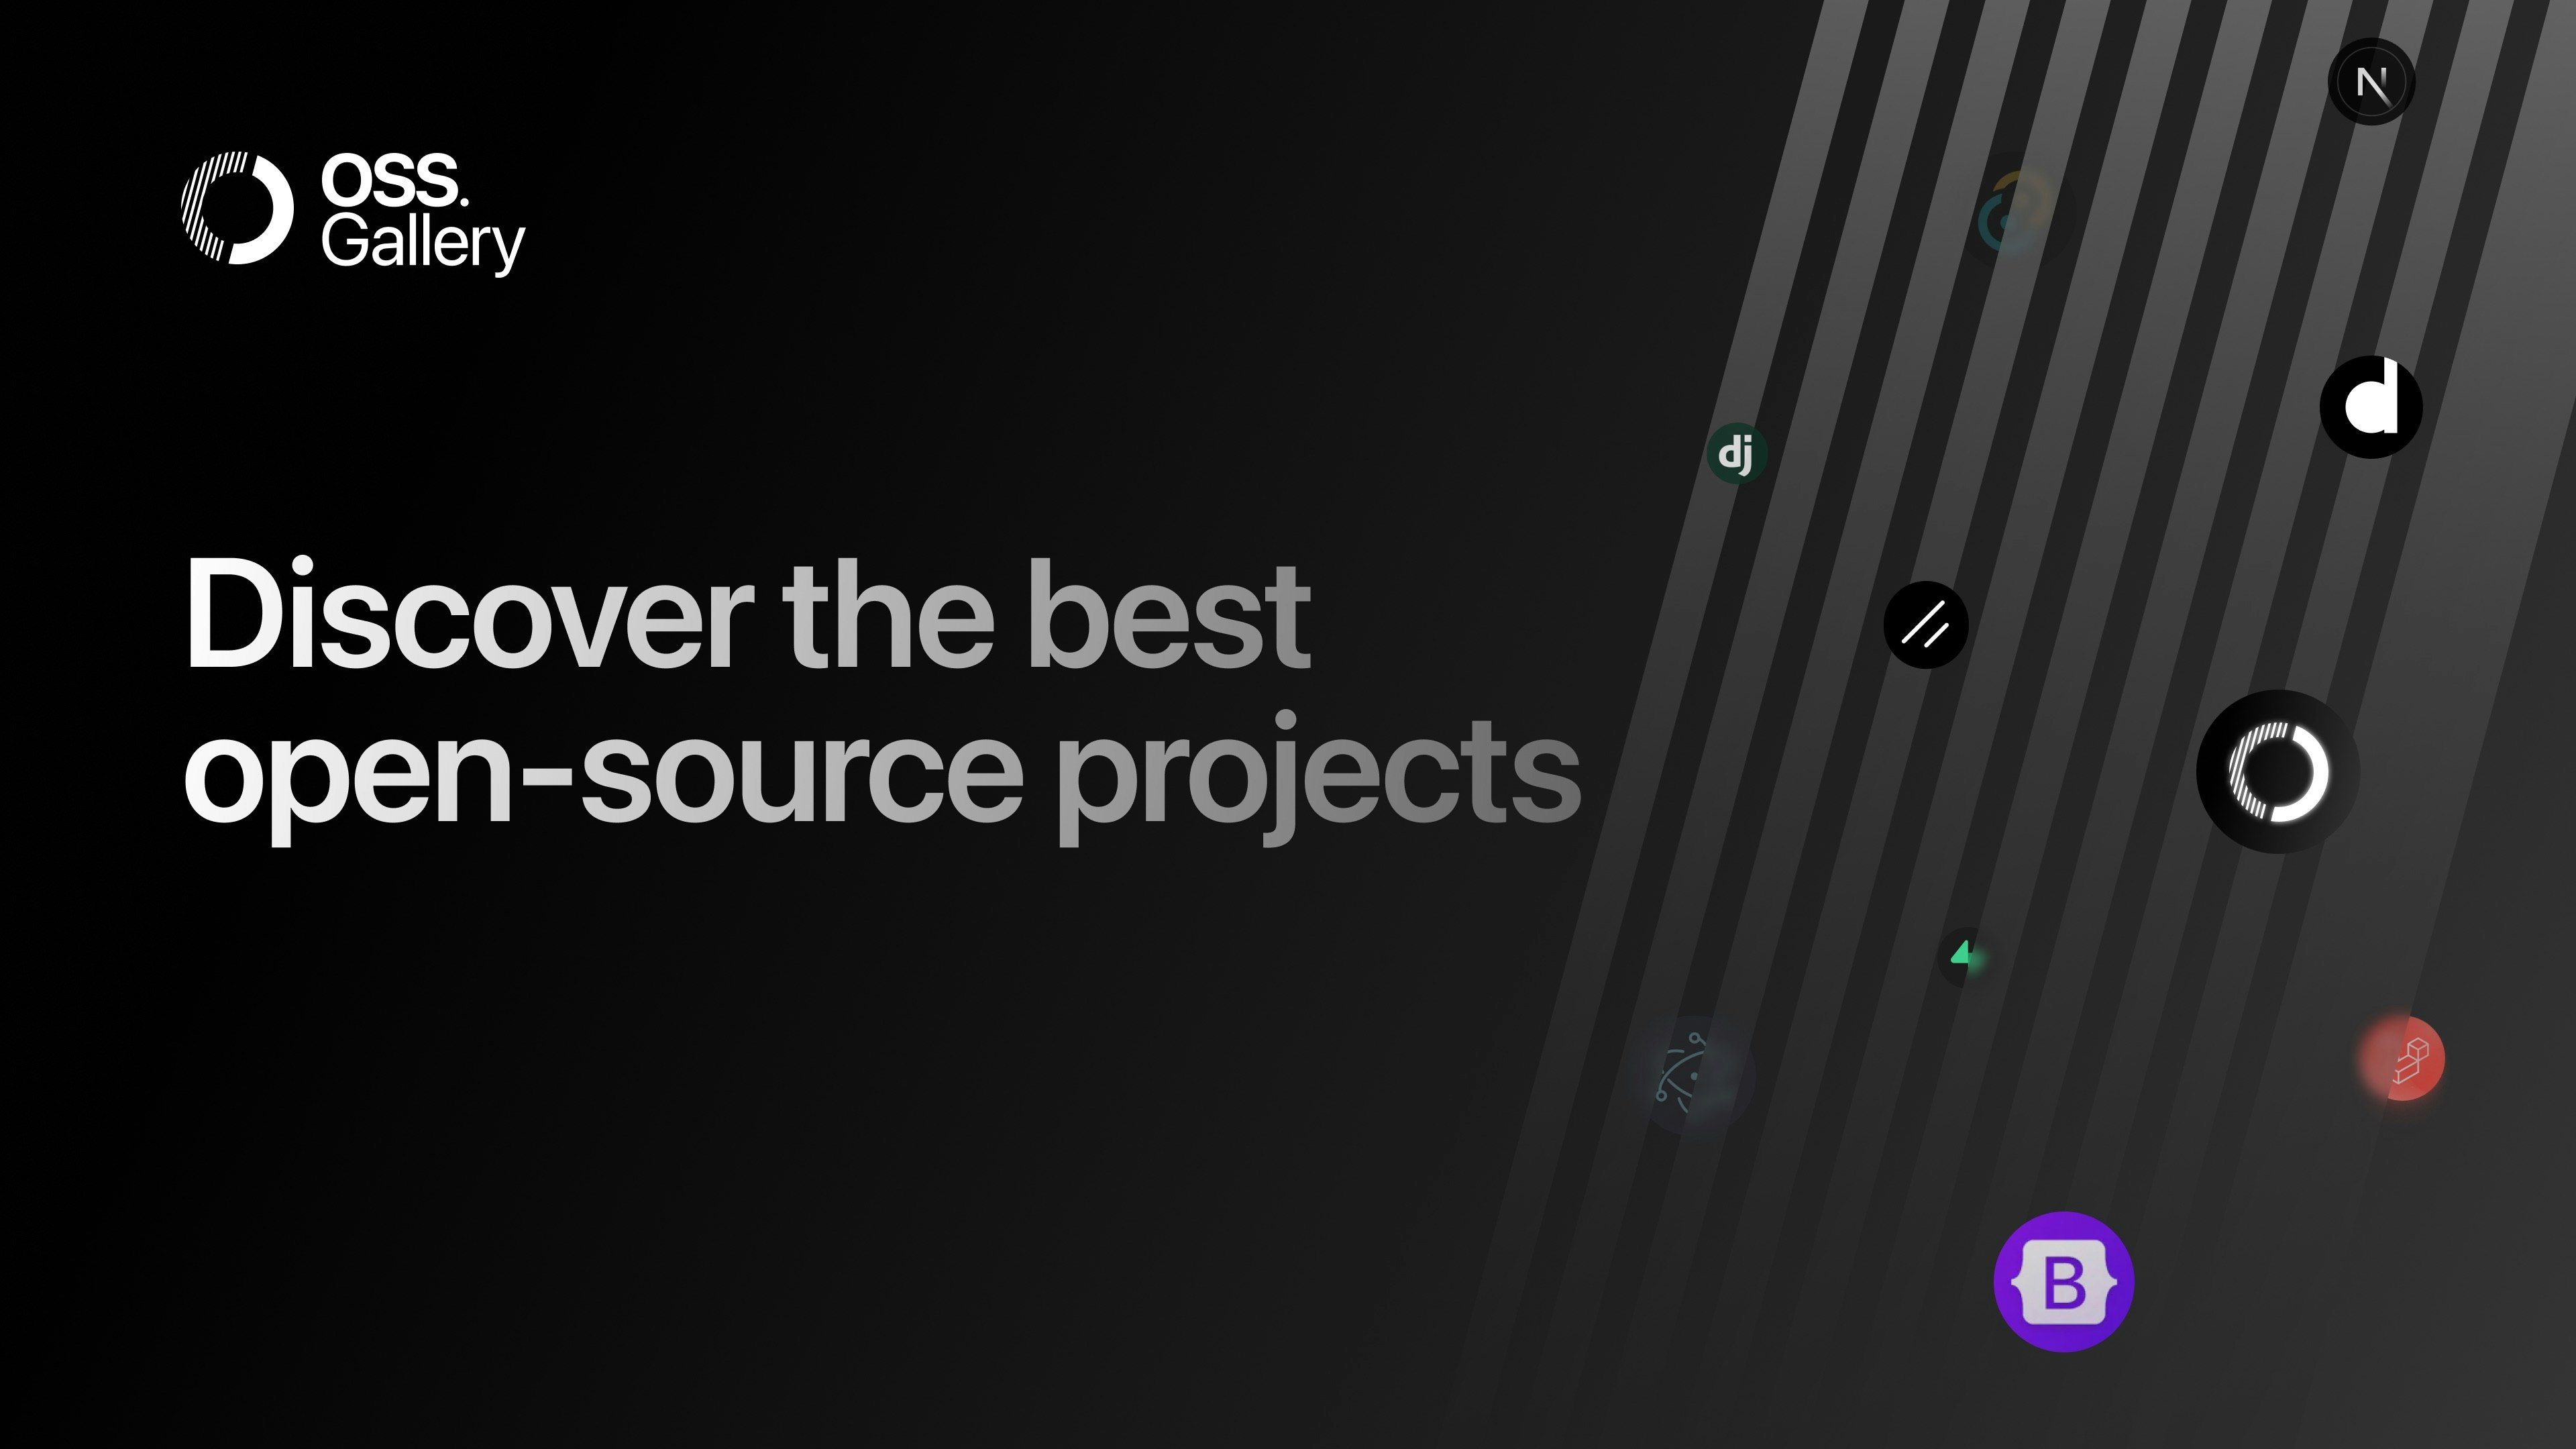 oss-gallery - Discover the best open-source projects